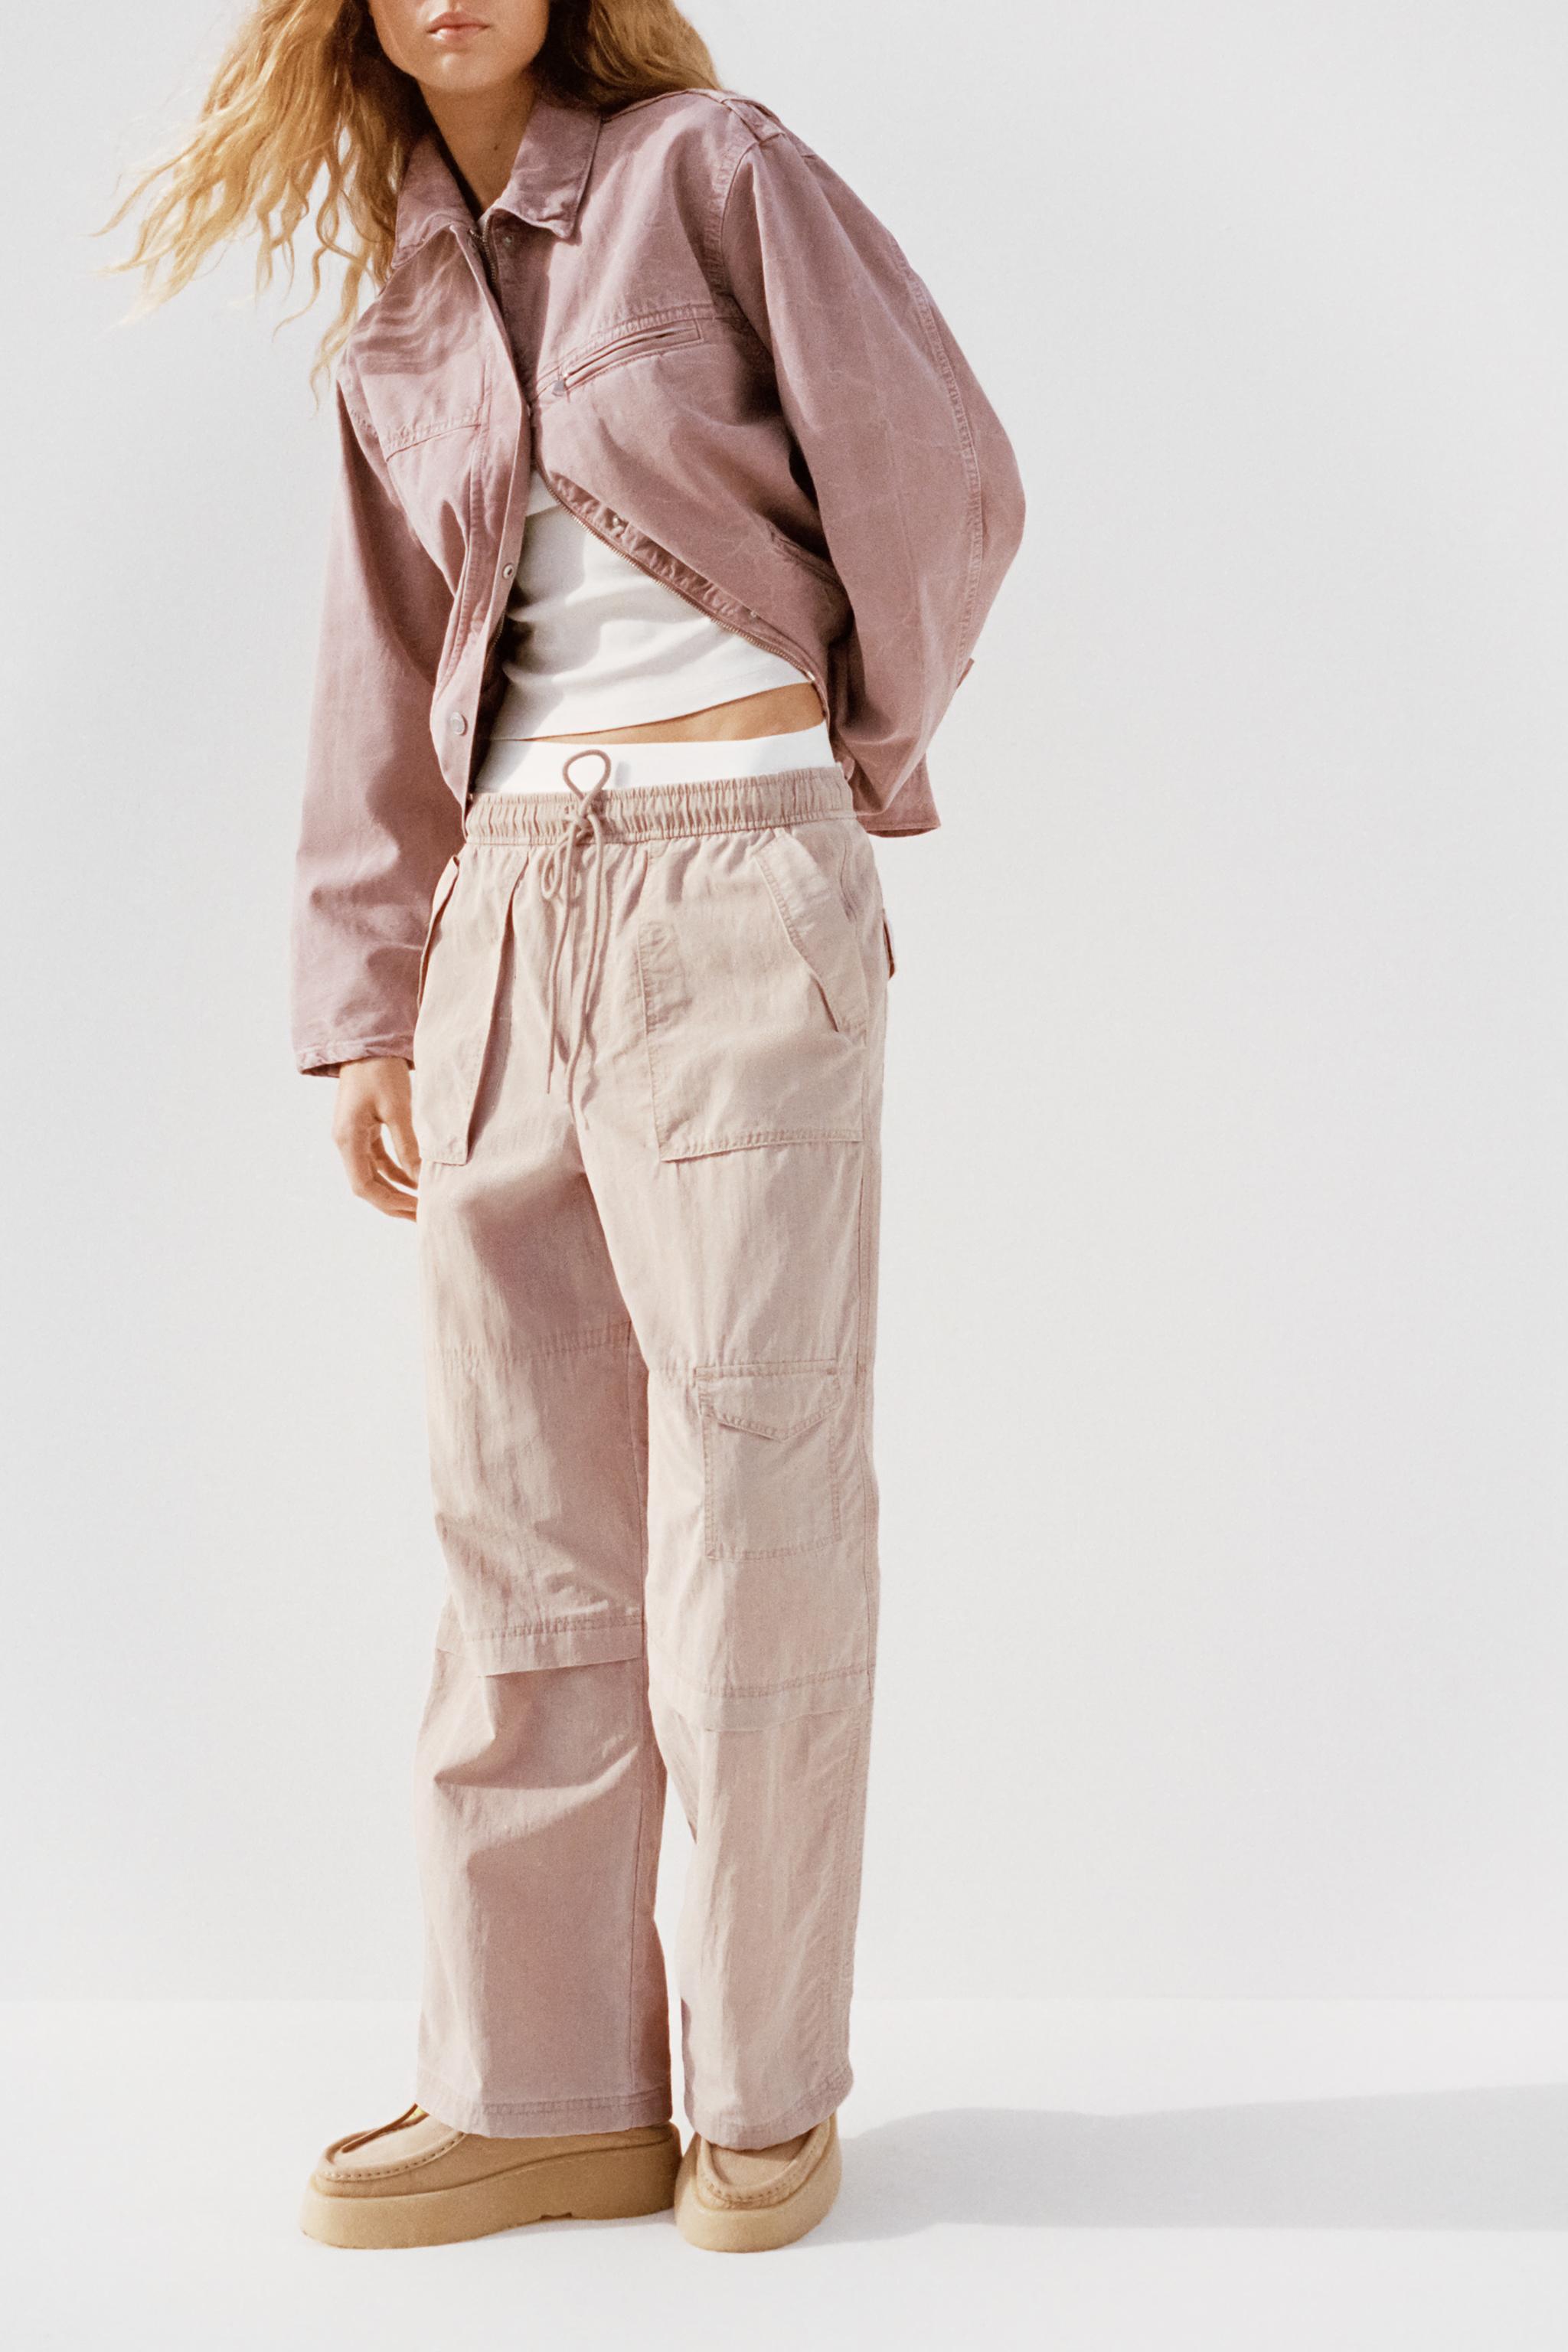 ZARA PINK TROUSERS WITH BELT Size L Ref. 4387/030